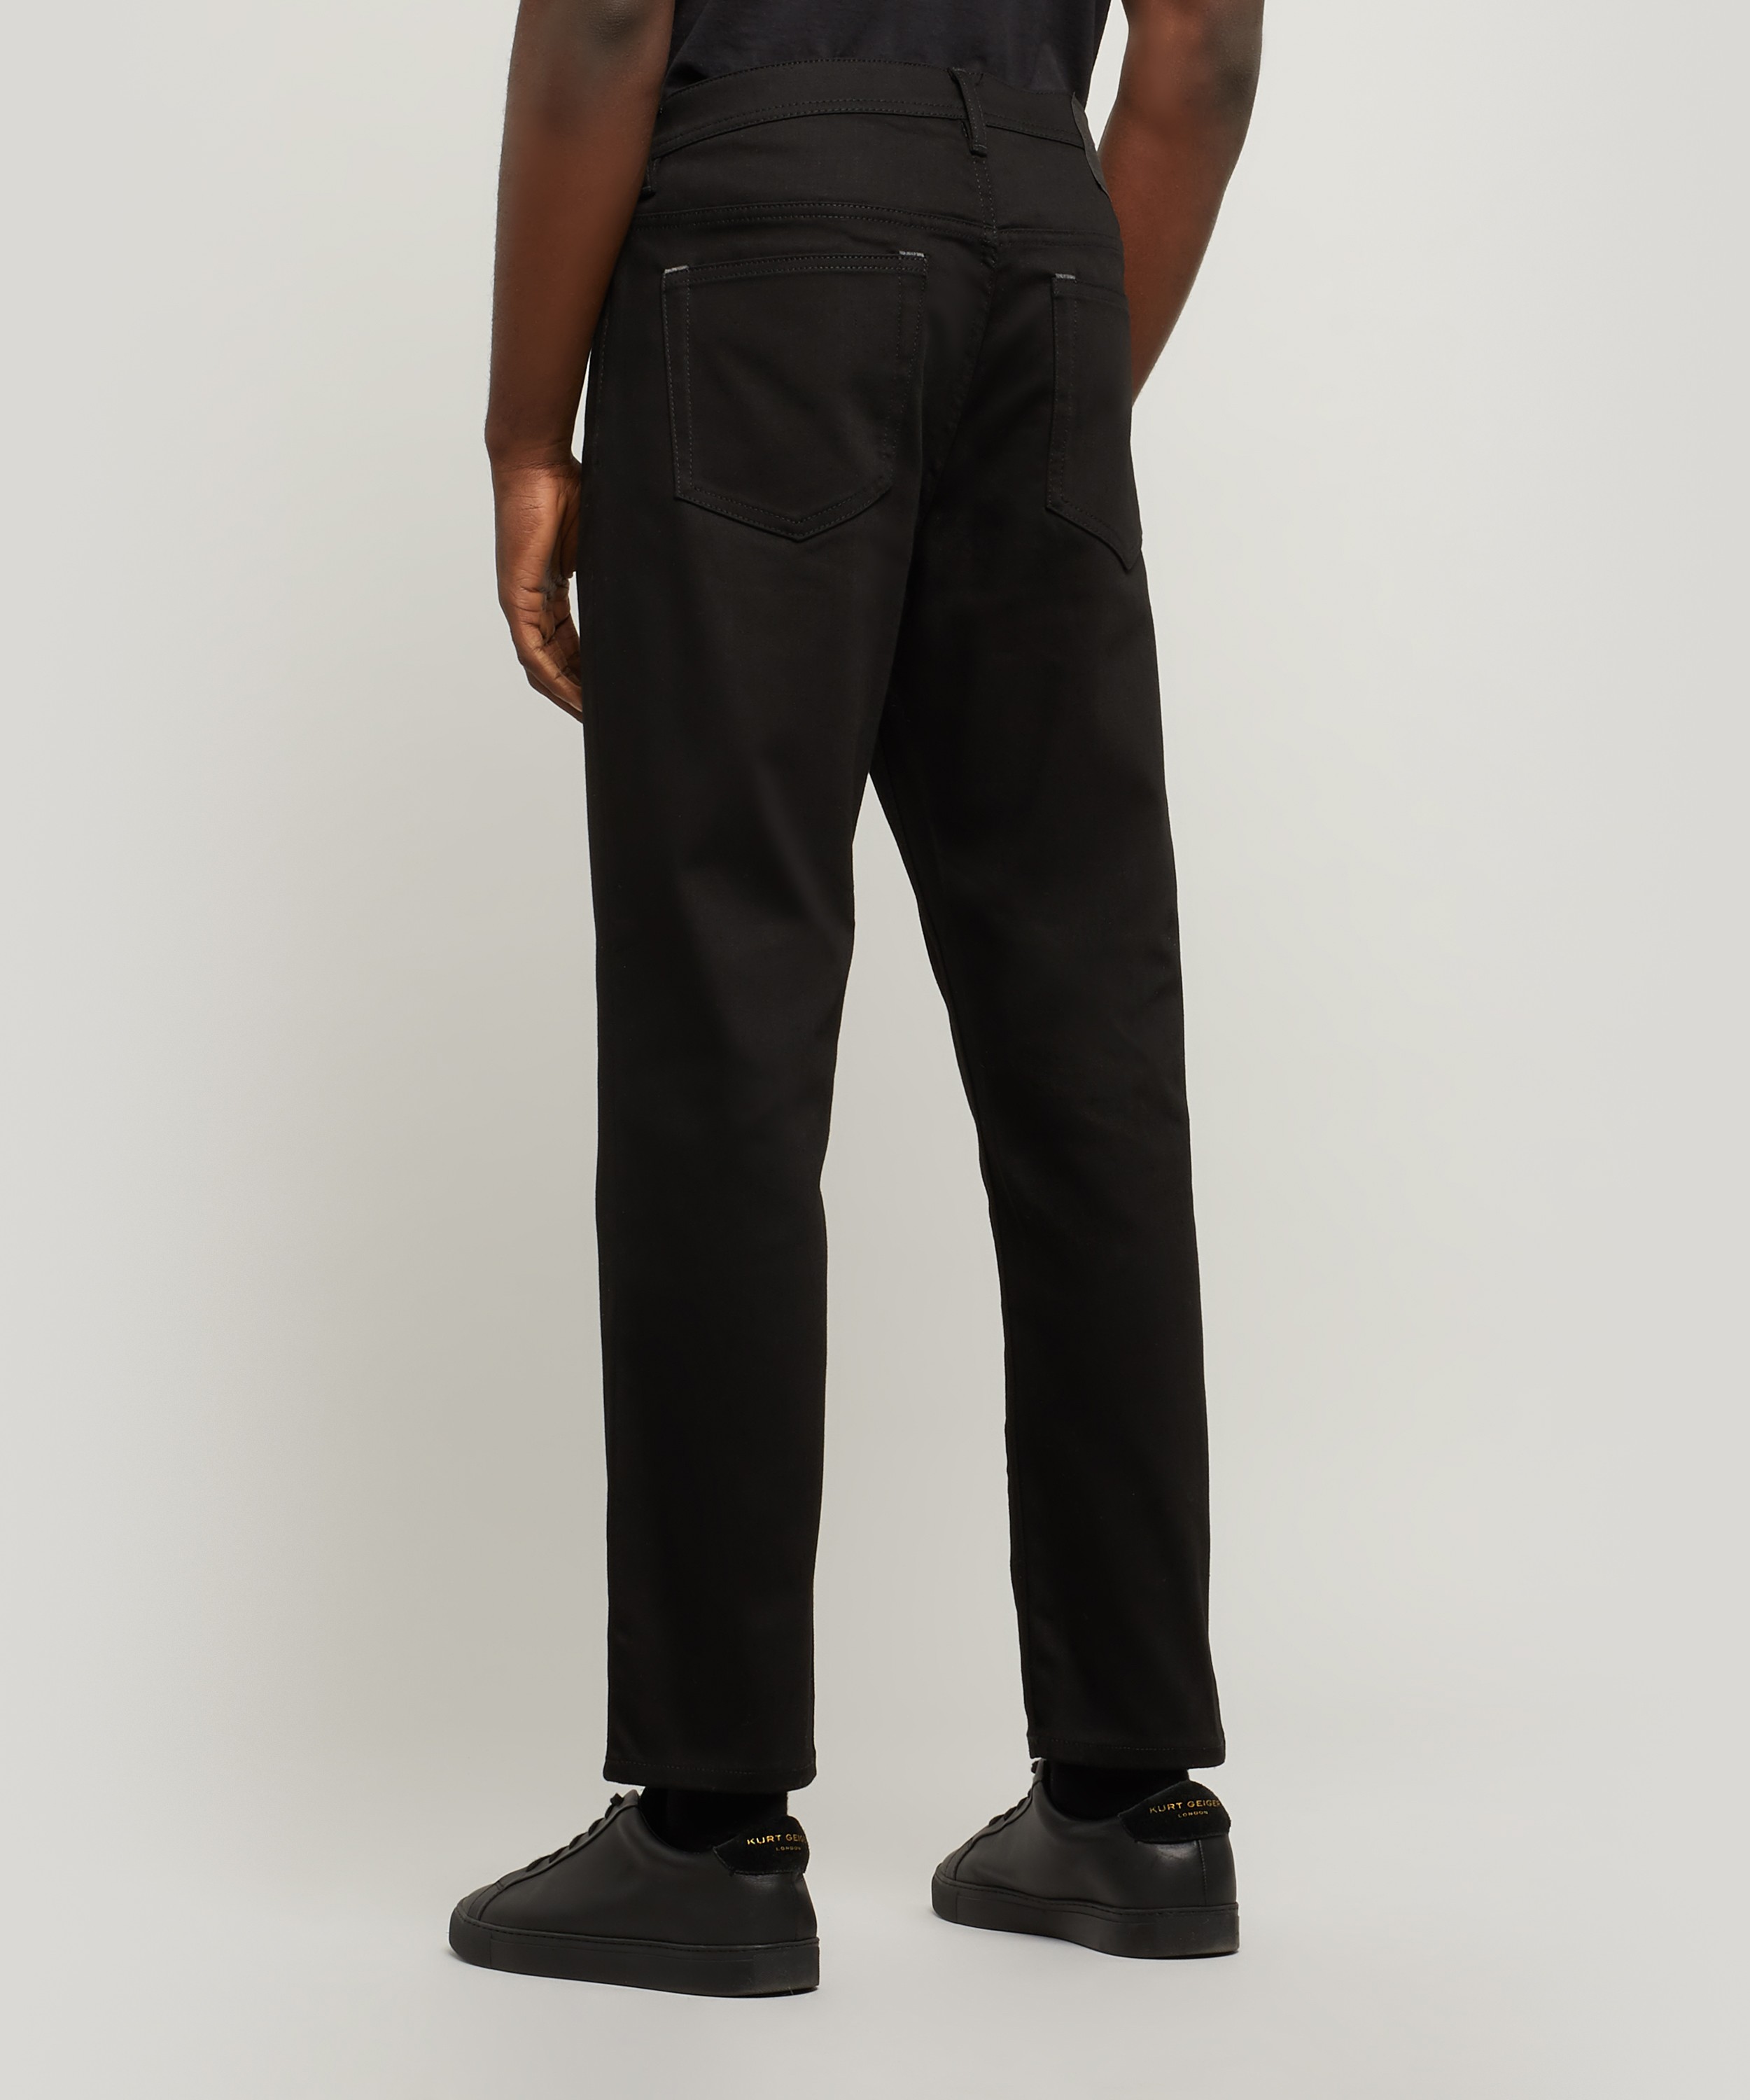 Acne Studios - River Stay Black Straight Fit Jeans image number 4